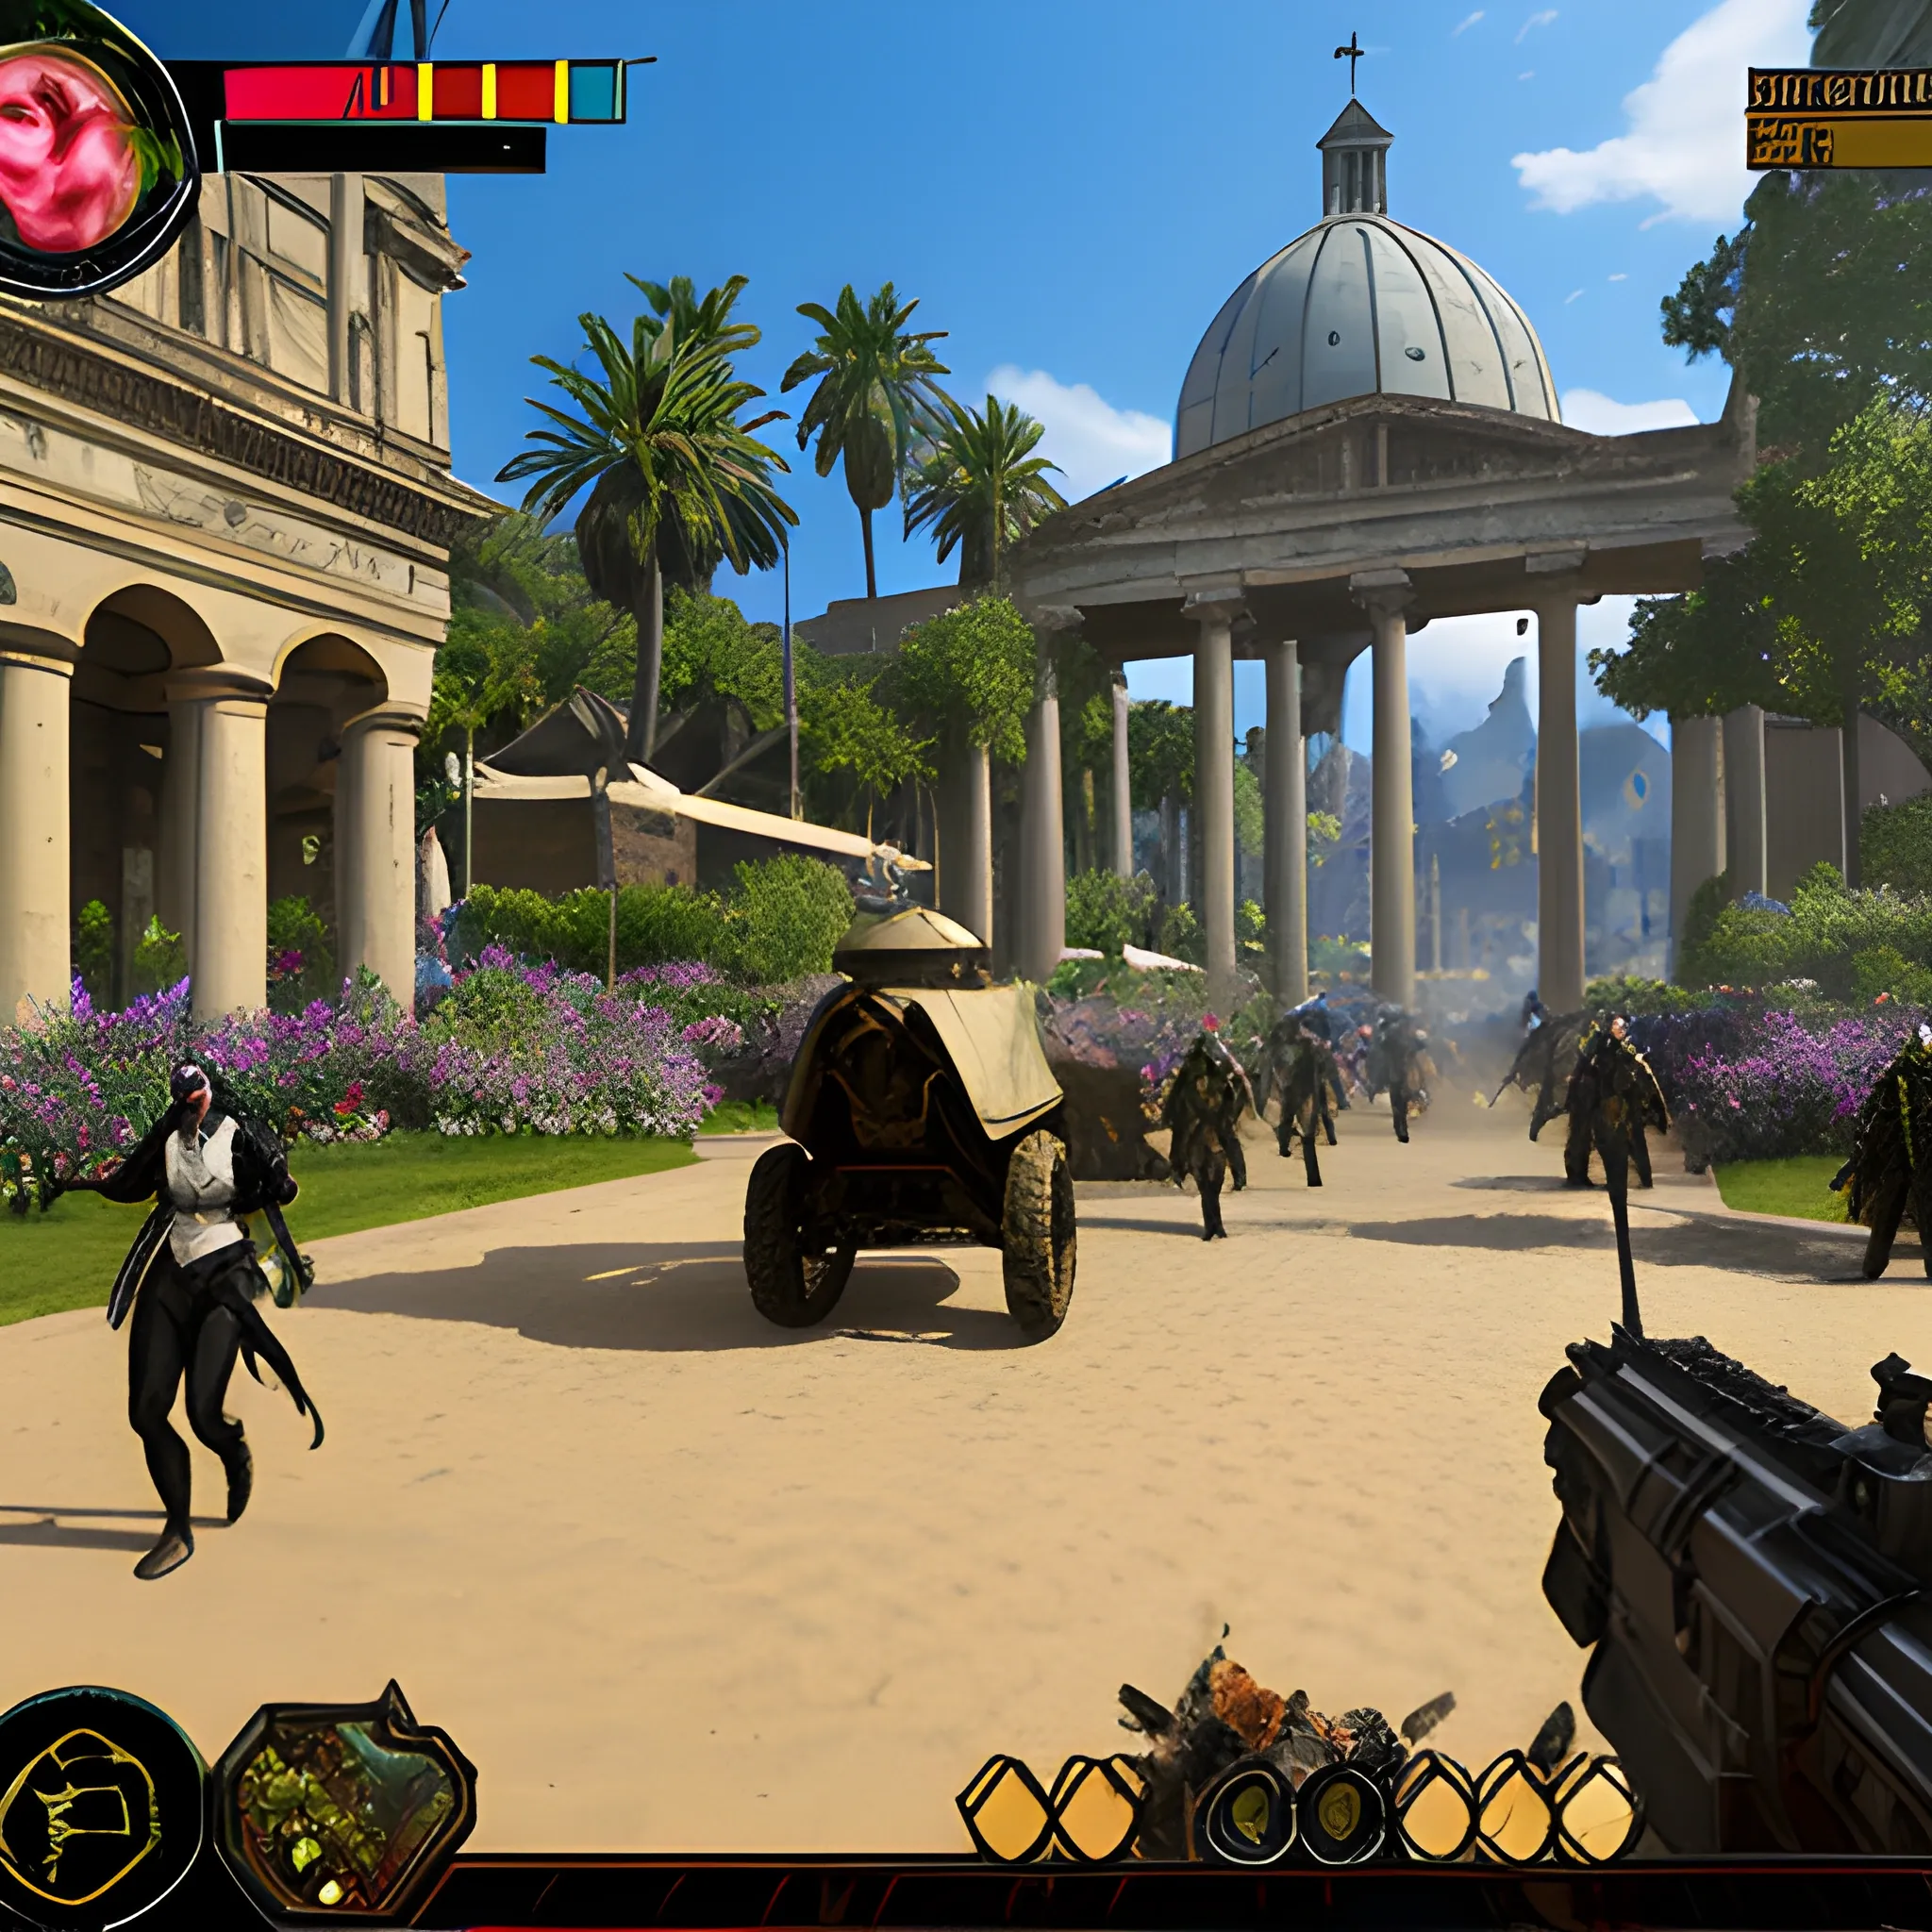 videogame screenshot with huge spangly sparkly assault rifle with gunsight in foreground, with young mothers pushing baby buggies, in a municipal gardens, in the ancient world, very detailed